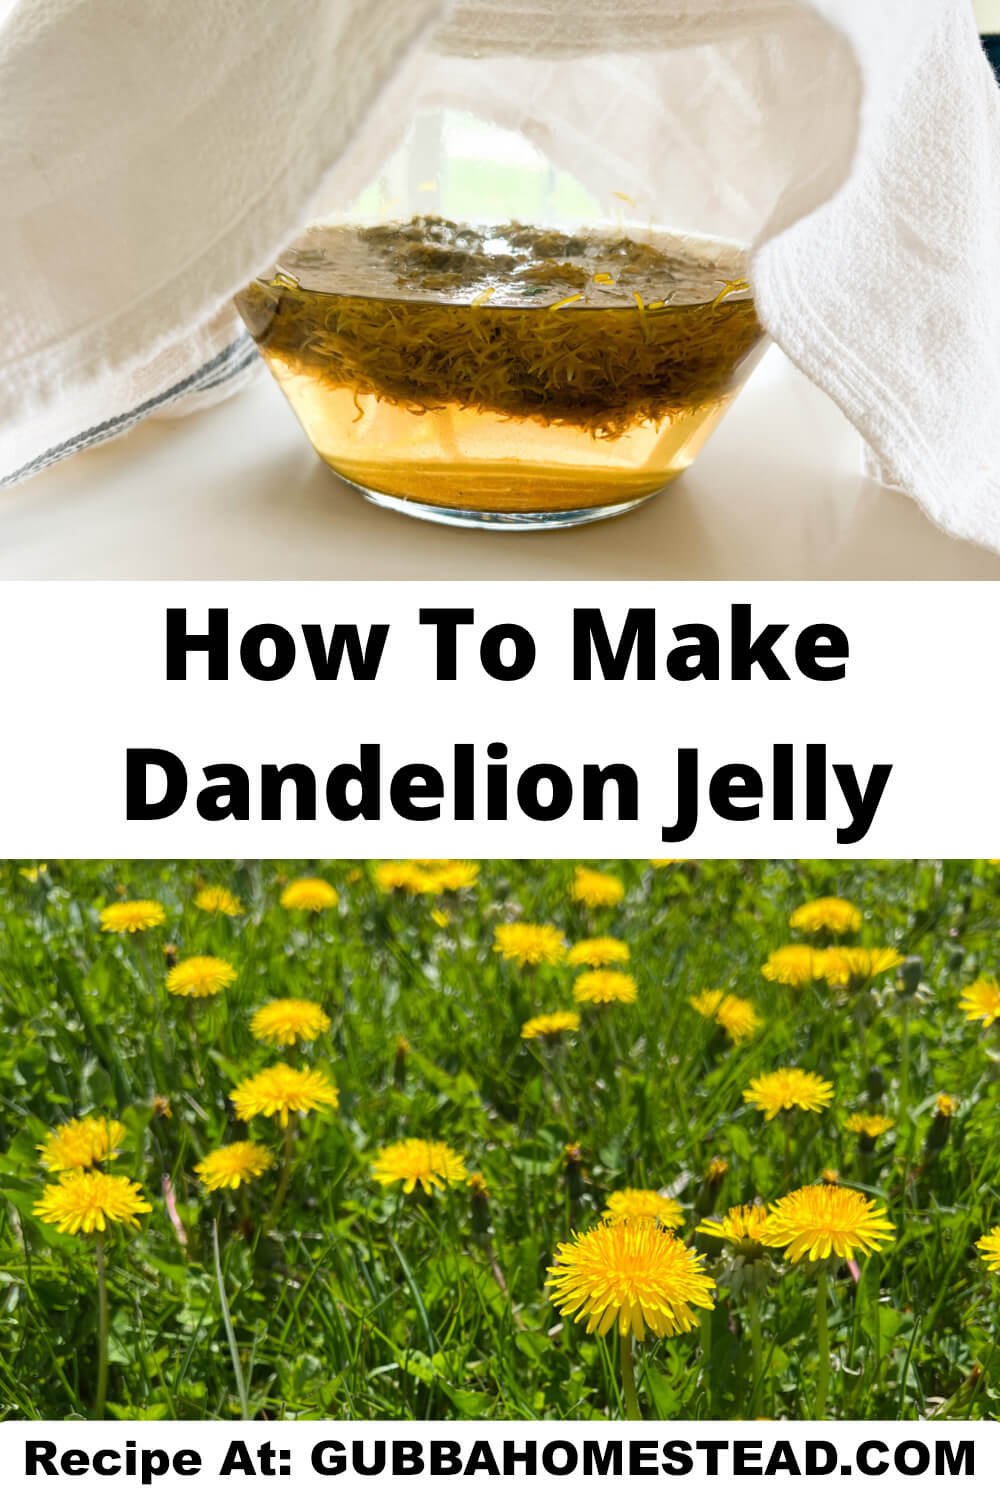 How To Make Dandelion Jelly